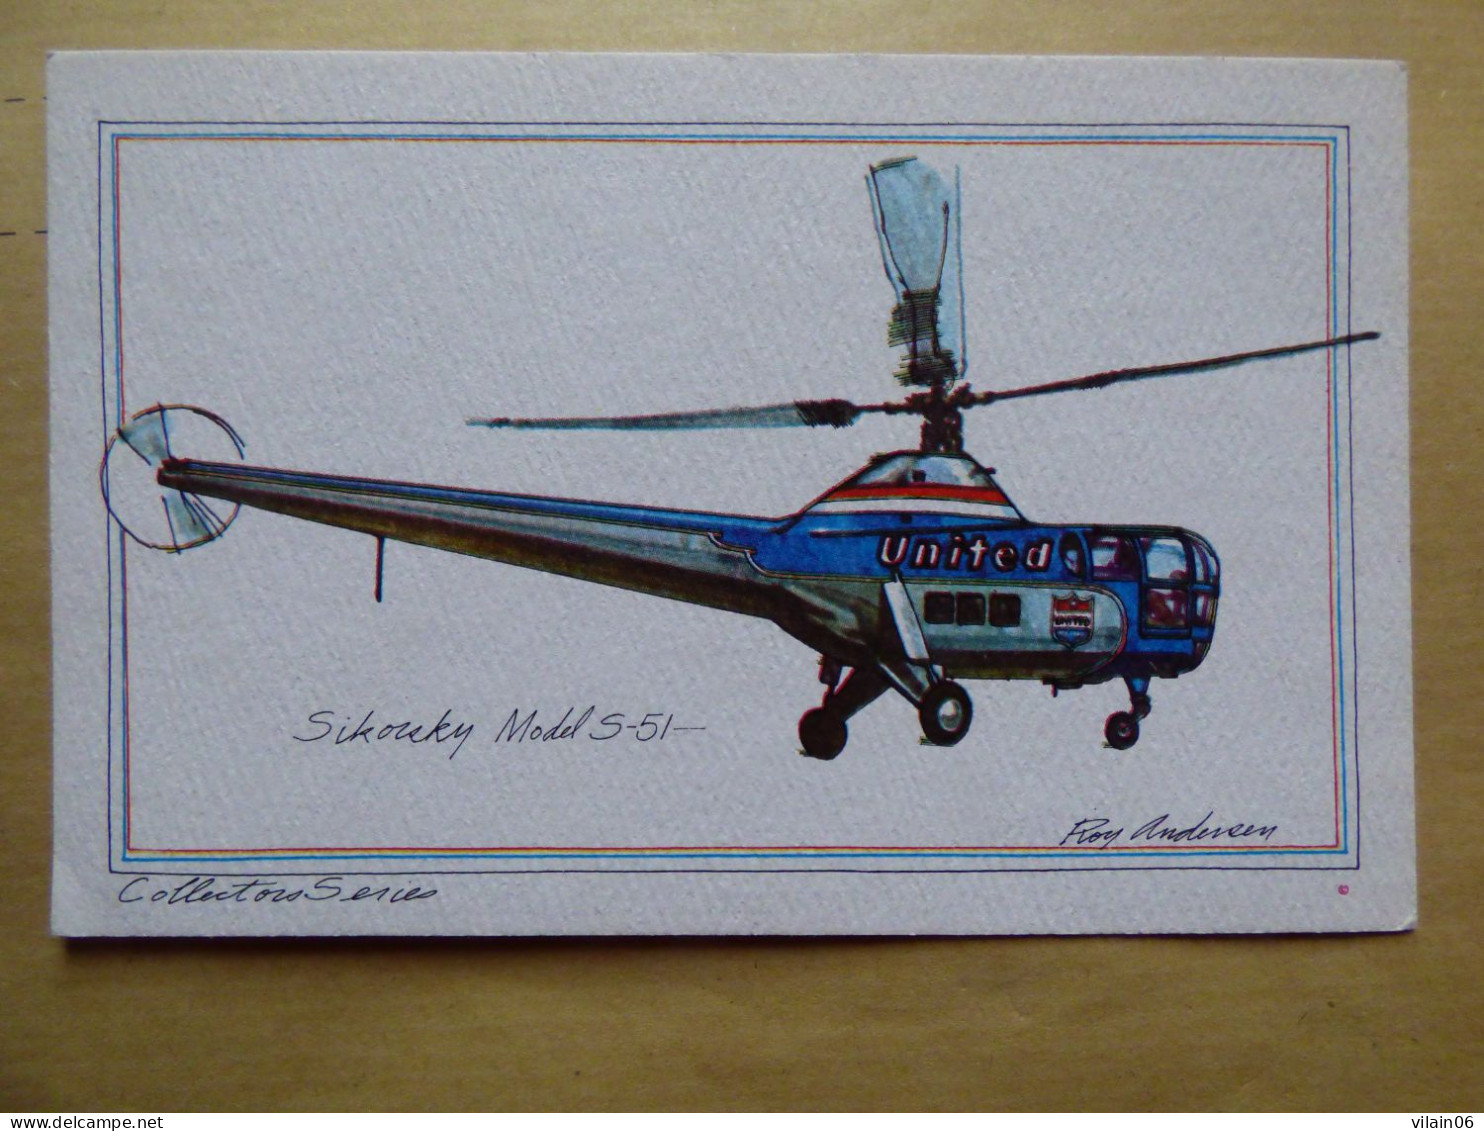 UNITED  SIKORSKY S-51  AIRLINES ISSUE / CARTE DE COMPAGNIE - Helikopters